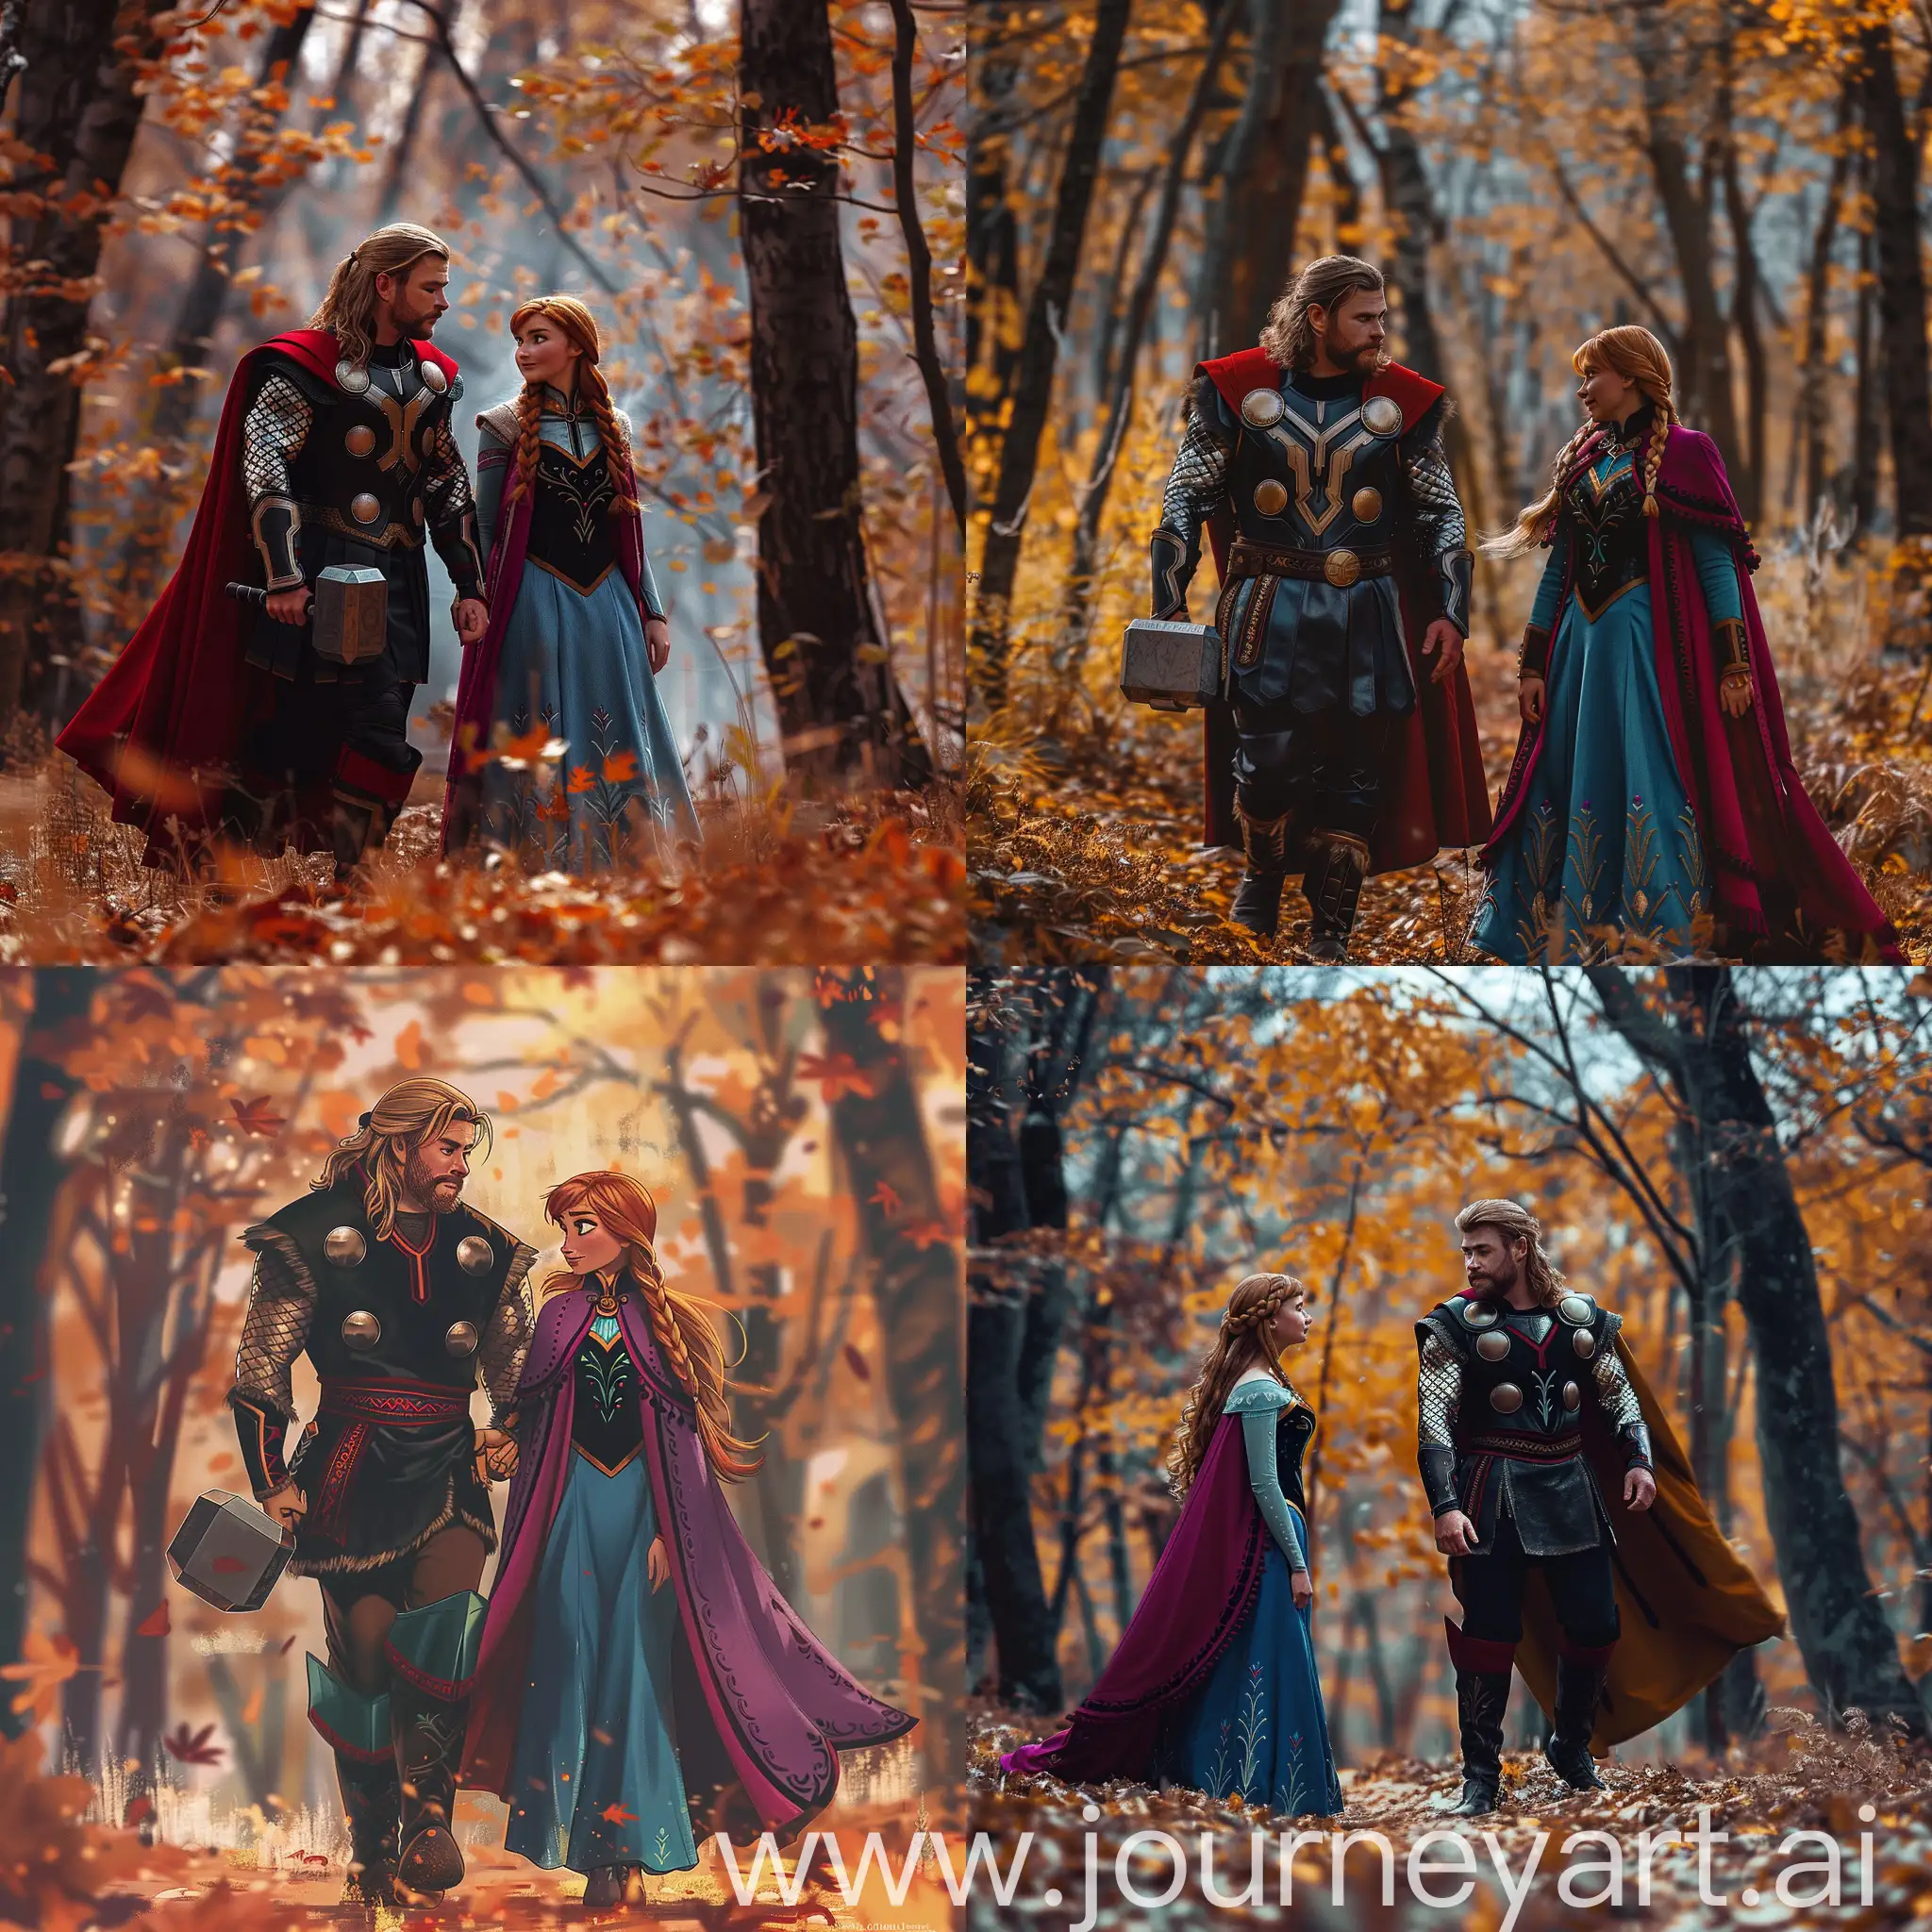 Thor walking next to Anna from Frozen, in the forest, autumn